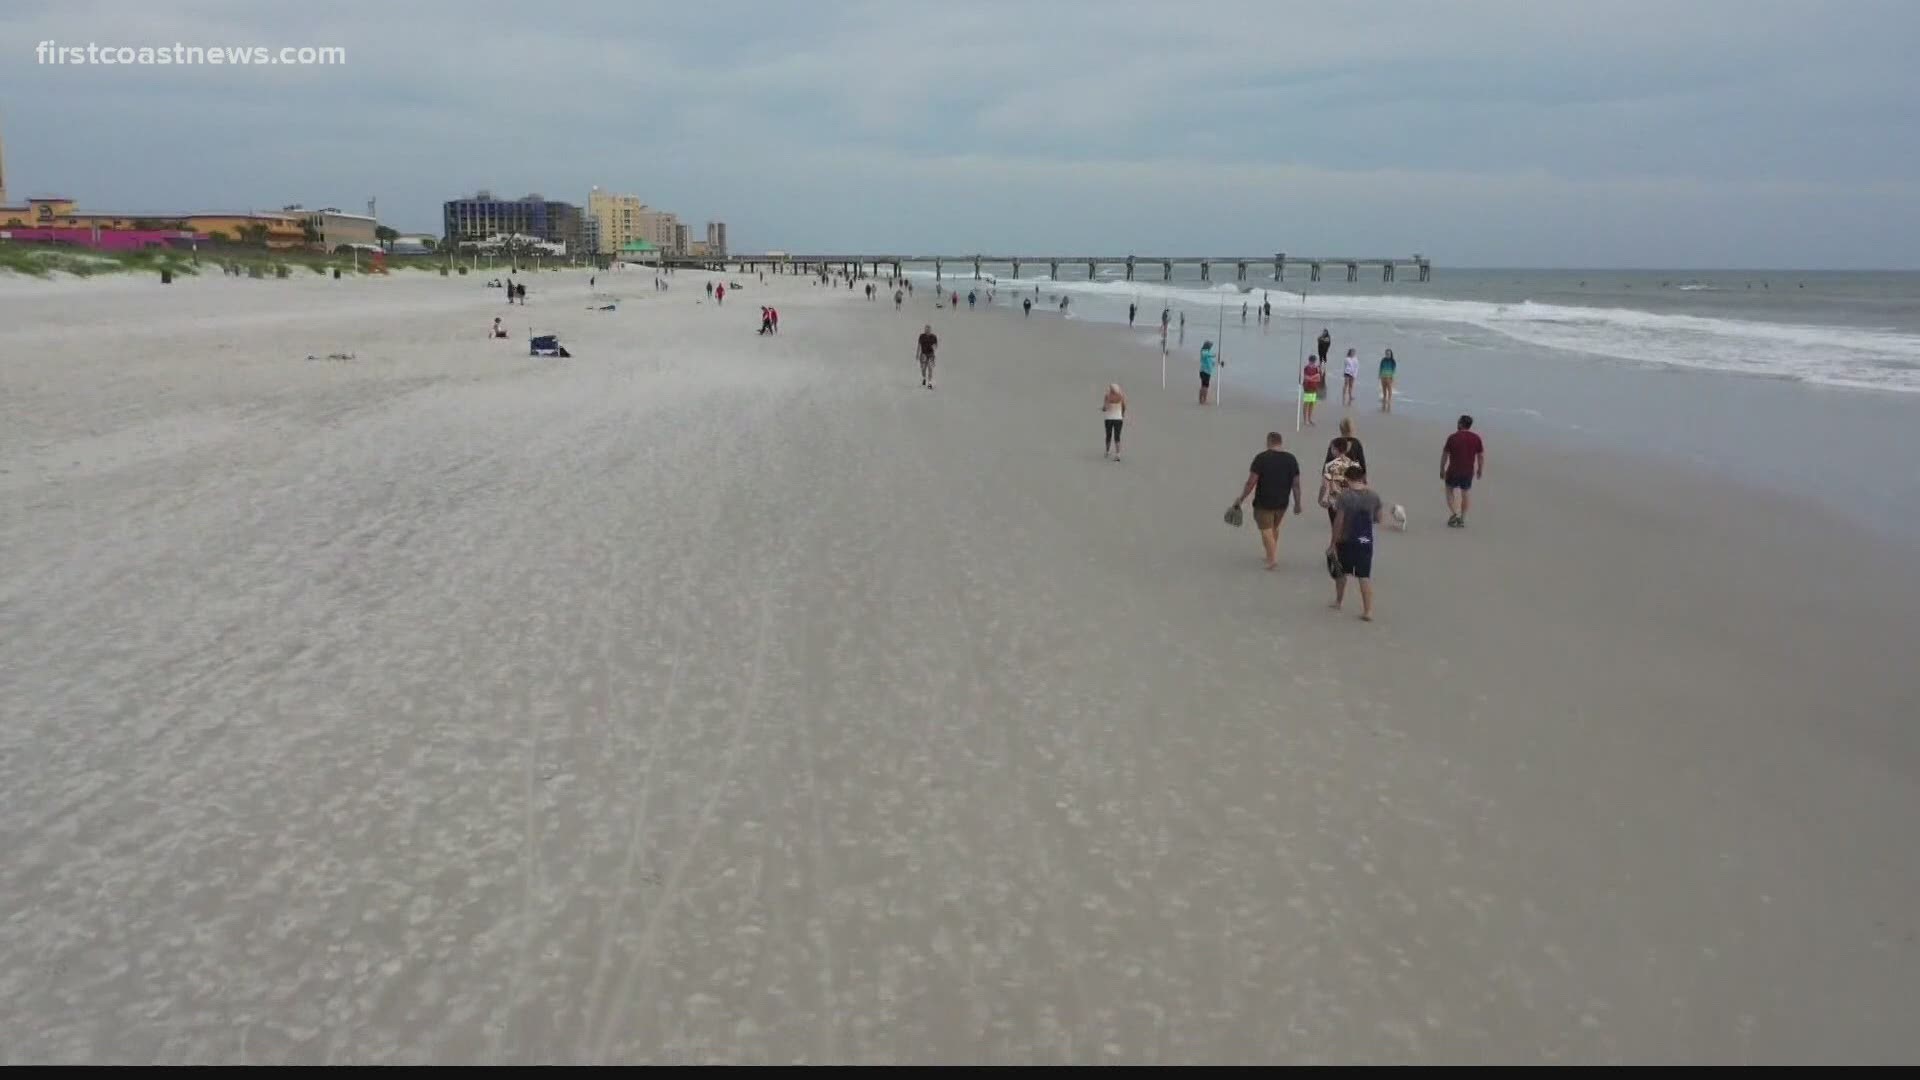 "If we closed the beach, it would be double the crowd," Jacksonville Beach's mayor said, saying the businesses on 1st Street would be packed.